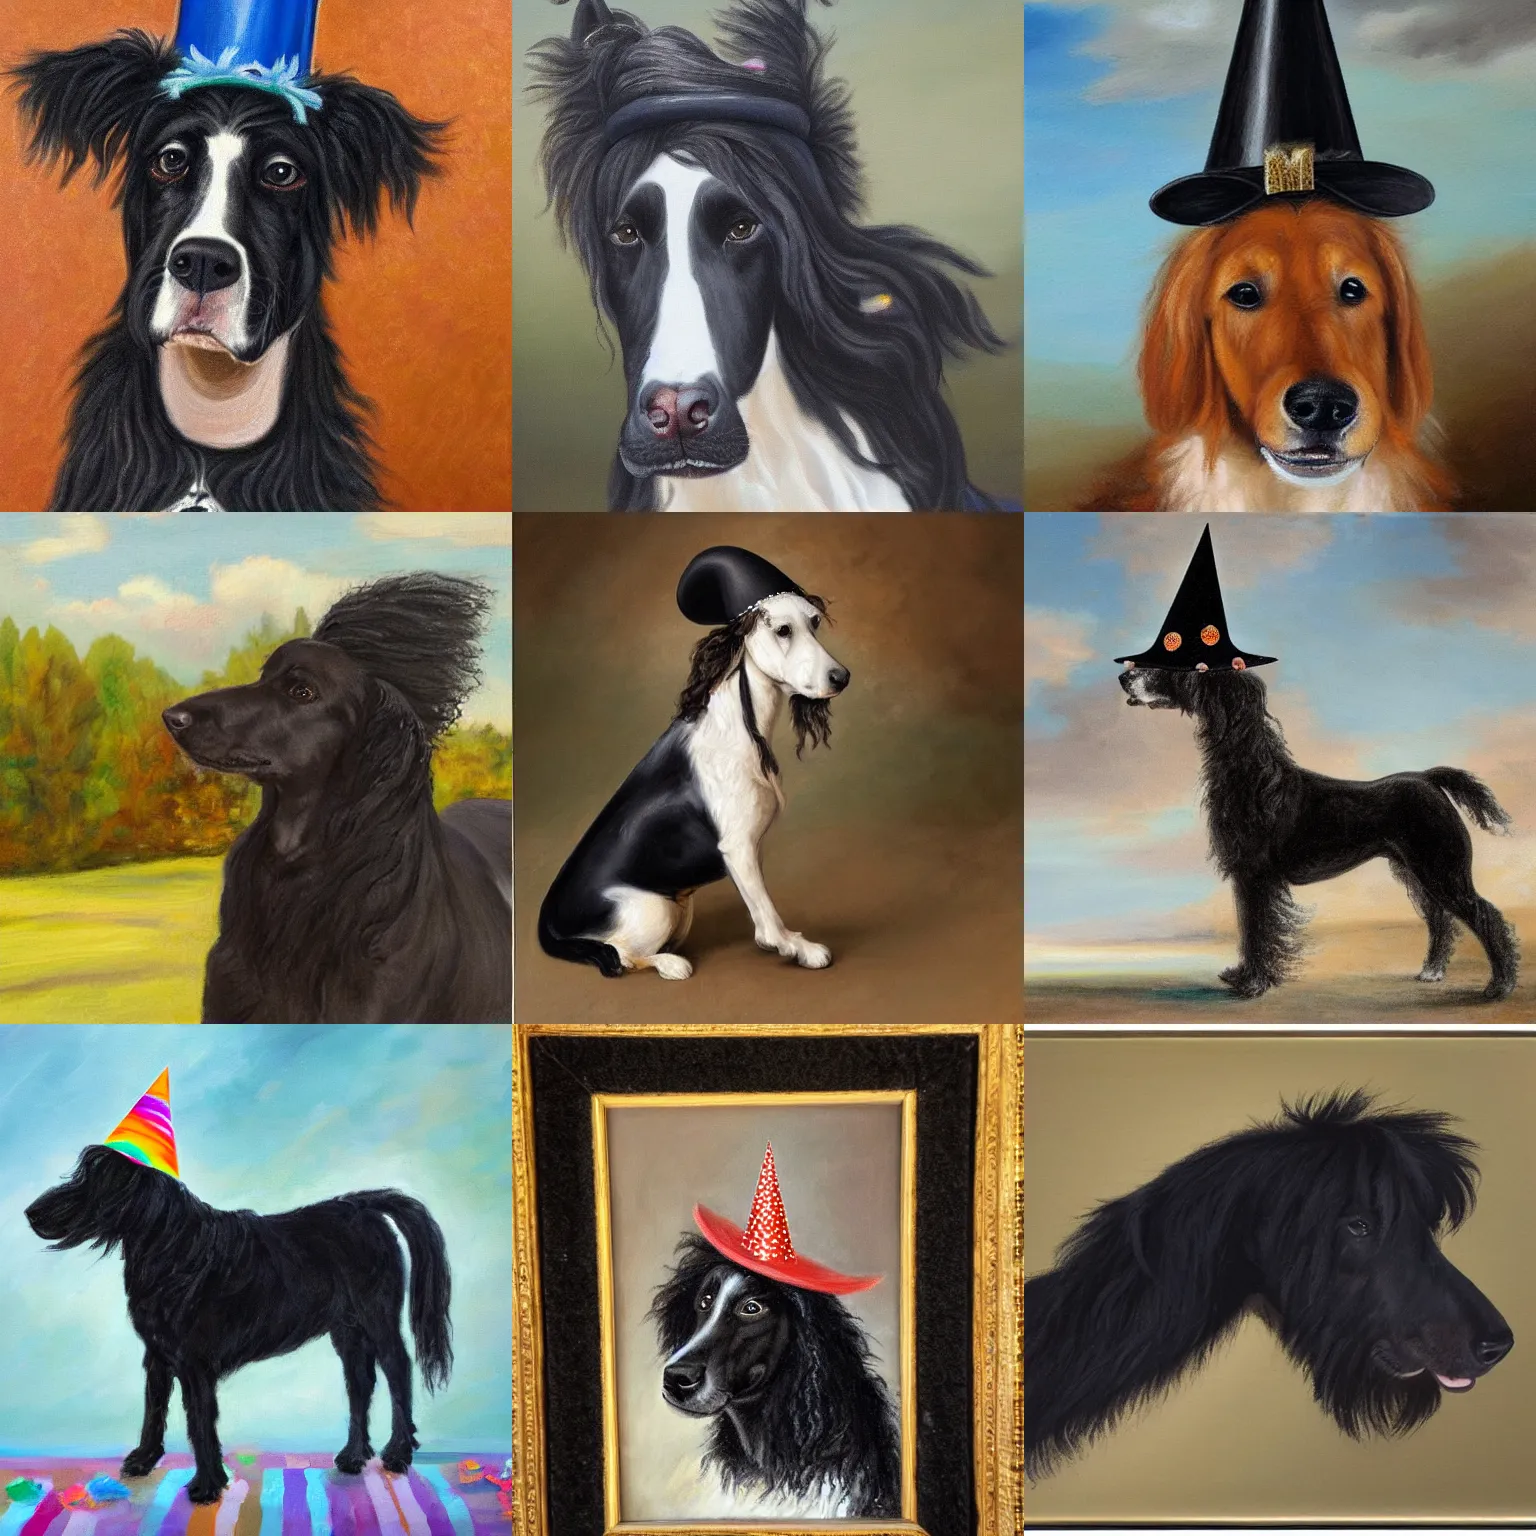 Prompt: a medium sized black schapendoes dog with wavy hair on a horse, both wearing party hats, birthday party, detailed oil painting